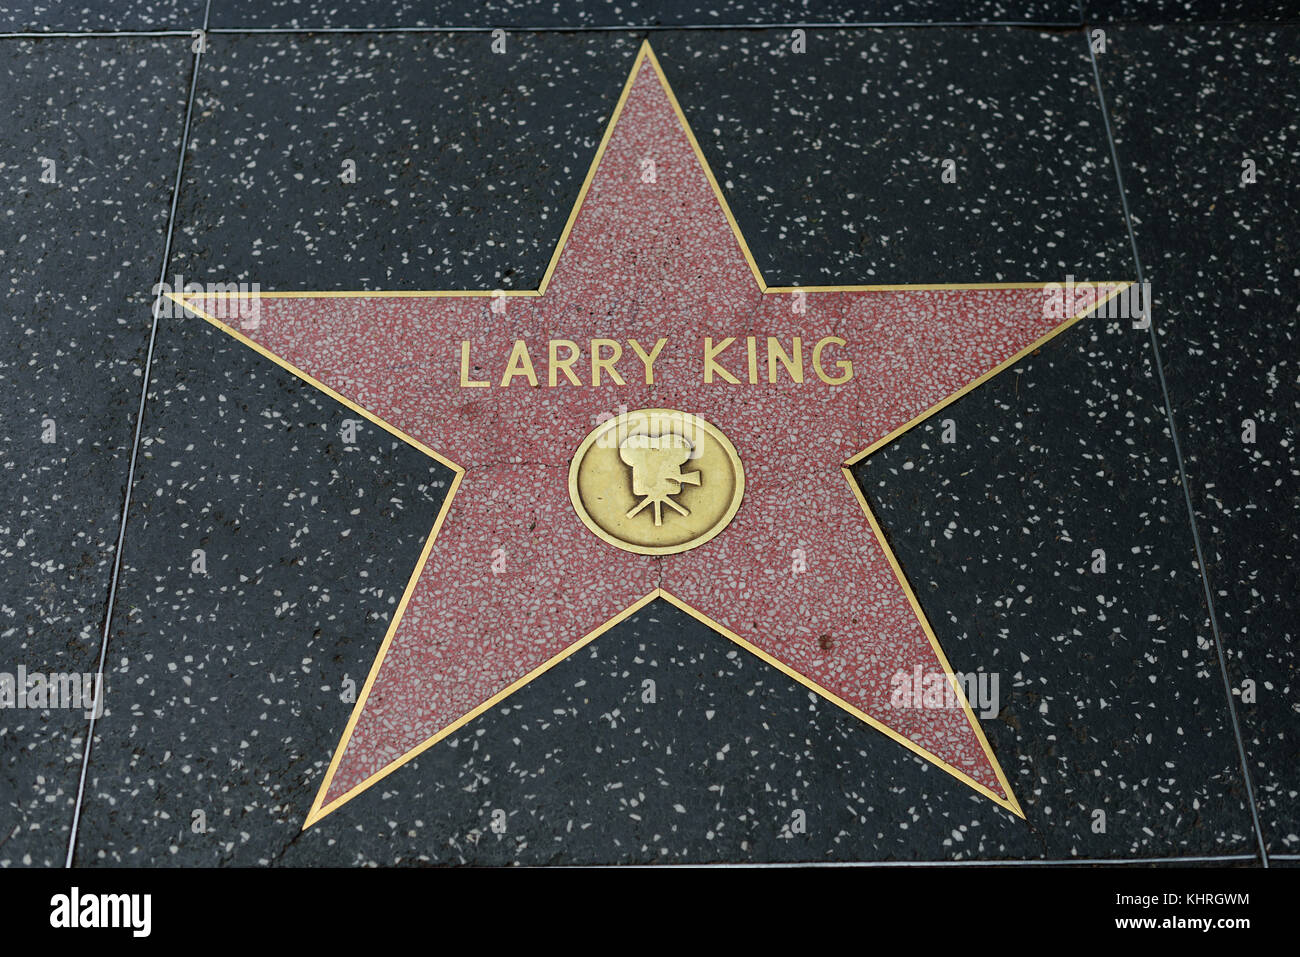 HOLLYWOOD, CA - DECEMBER 06: Larry King star on the Hollywood Walk of Fame in Hollywood, California on Dec. 6, 2016. Stock Photo